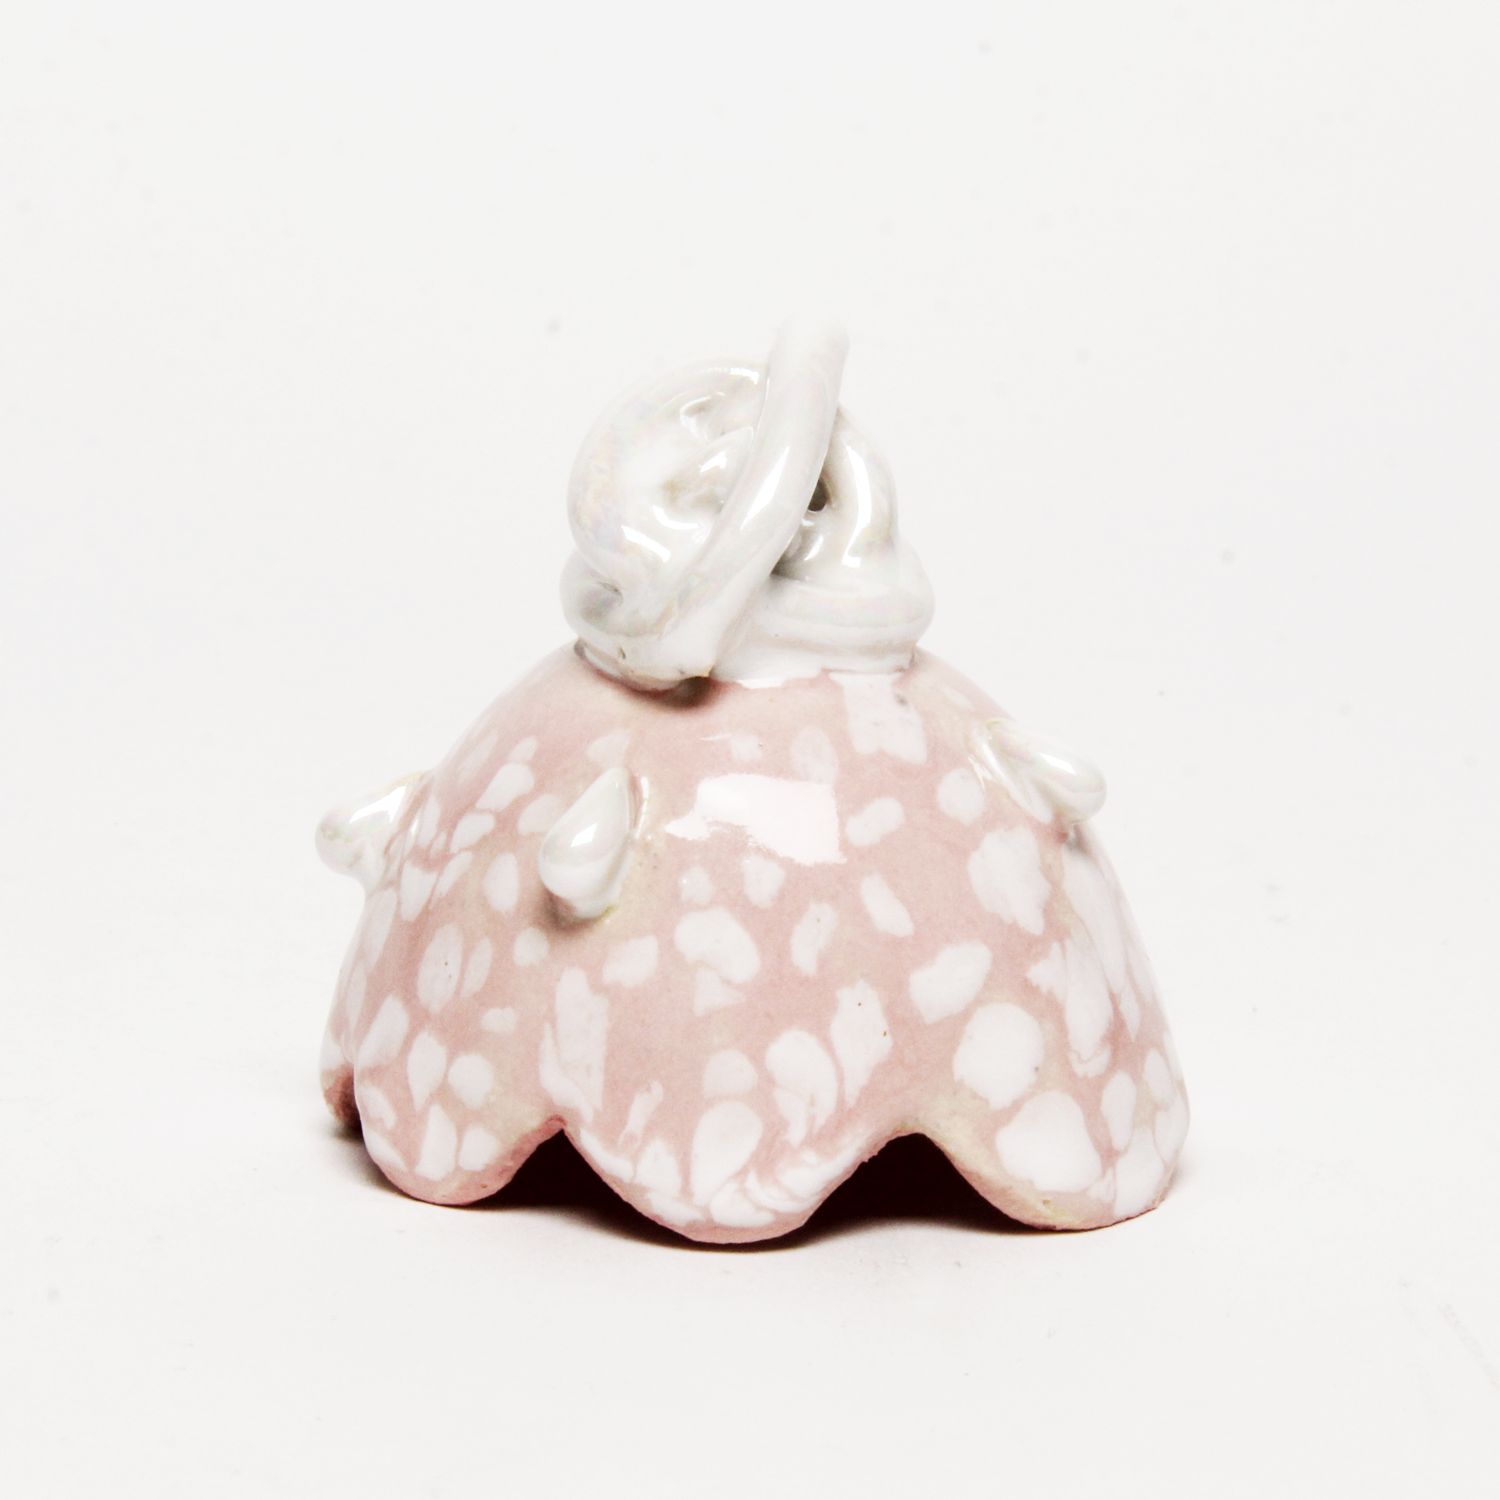 Hannah Faas: Small Sculpture in Raspberry Product Image 1 of 3